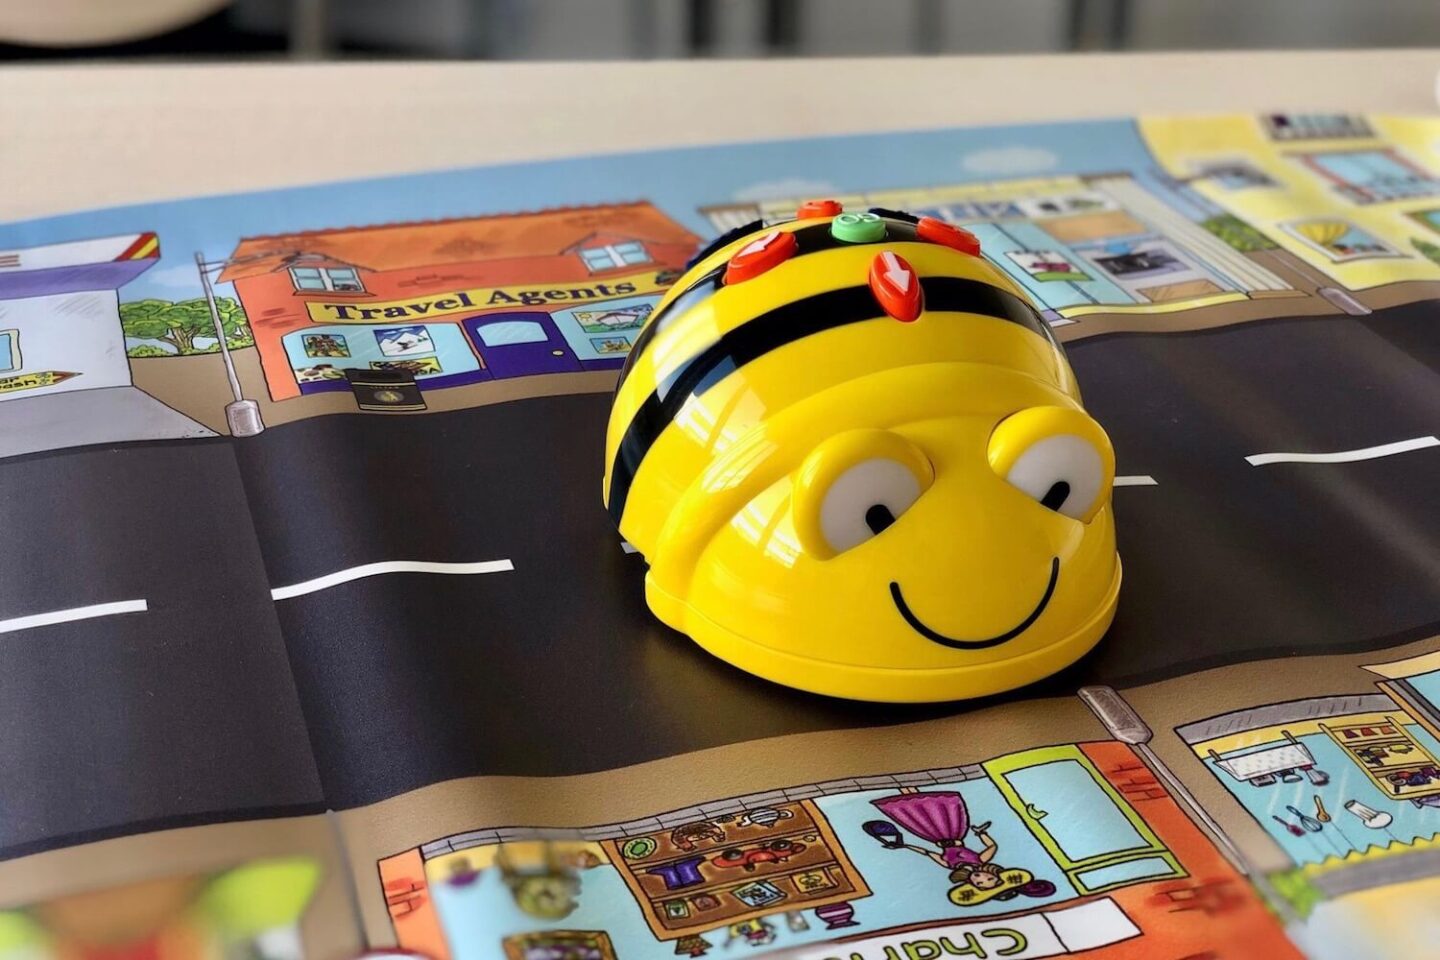 A bumblebee coding toy